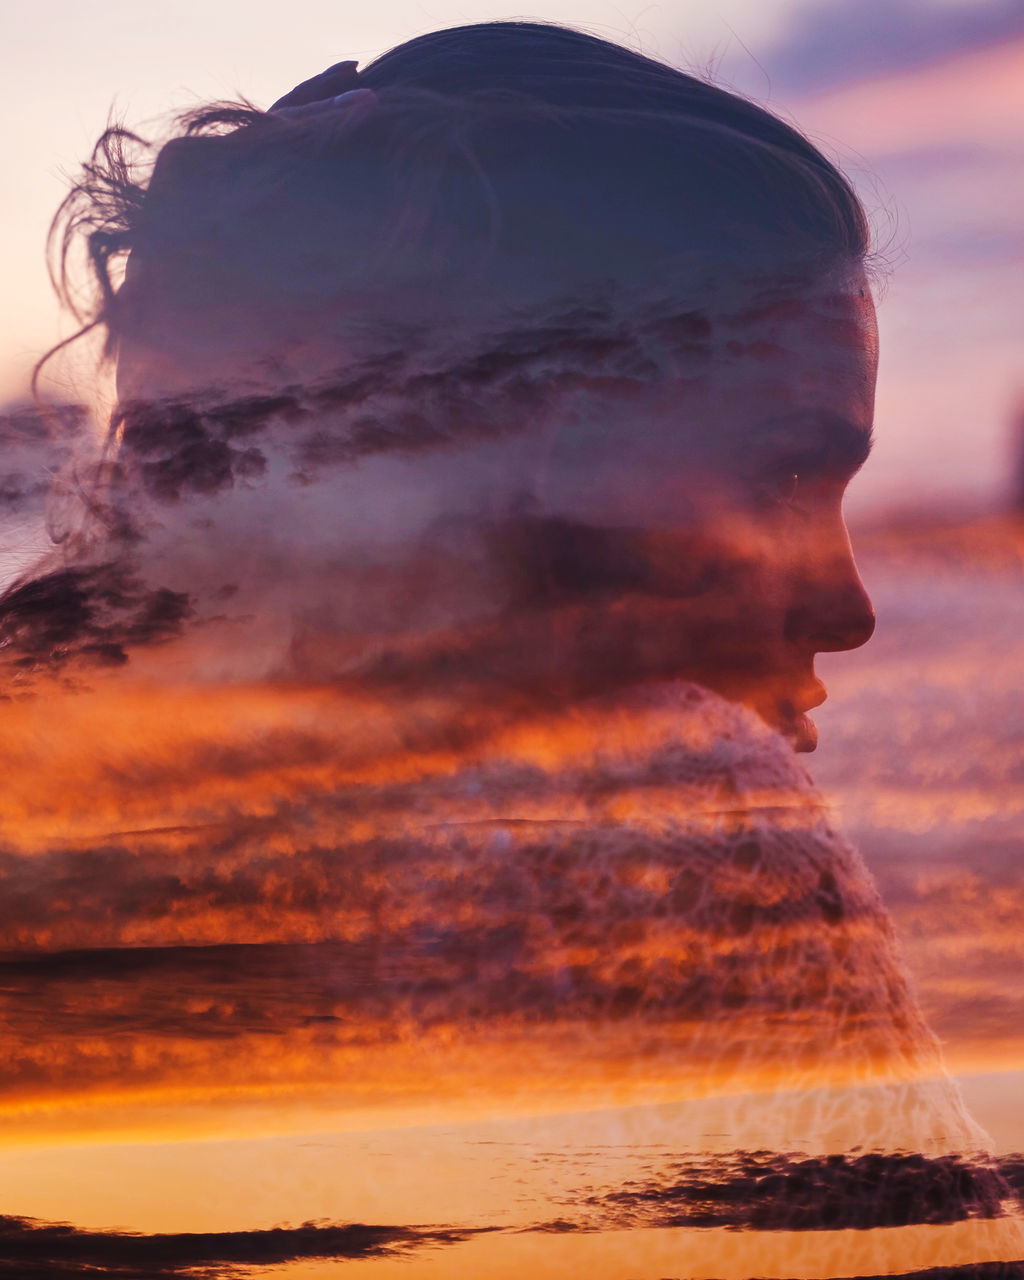 sunset, one person, headshot, portrait, sky, nature, orange color, adult, real people, men, side view, leisure activity, lifestyles, cloud - sky, outdoors, sea, land, young adult, digital composite, contemplation, profile view